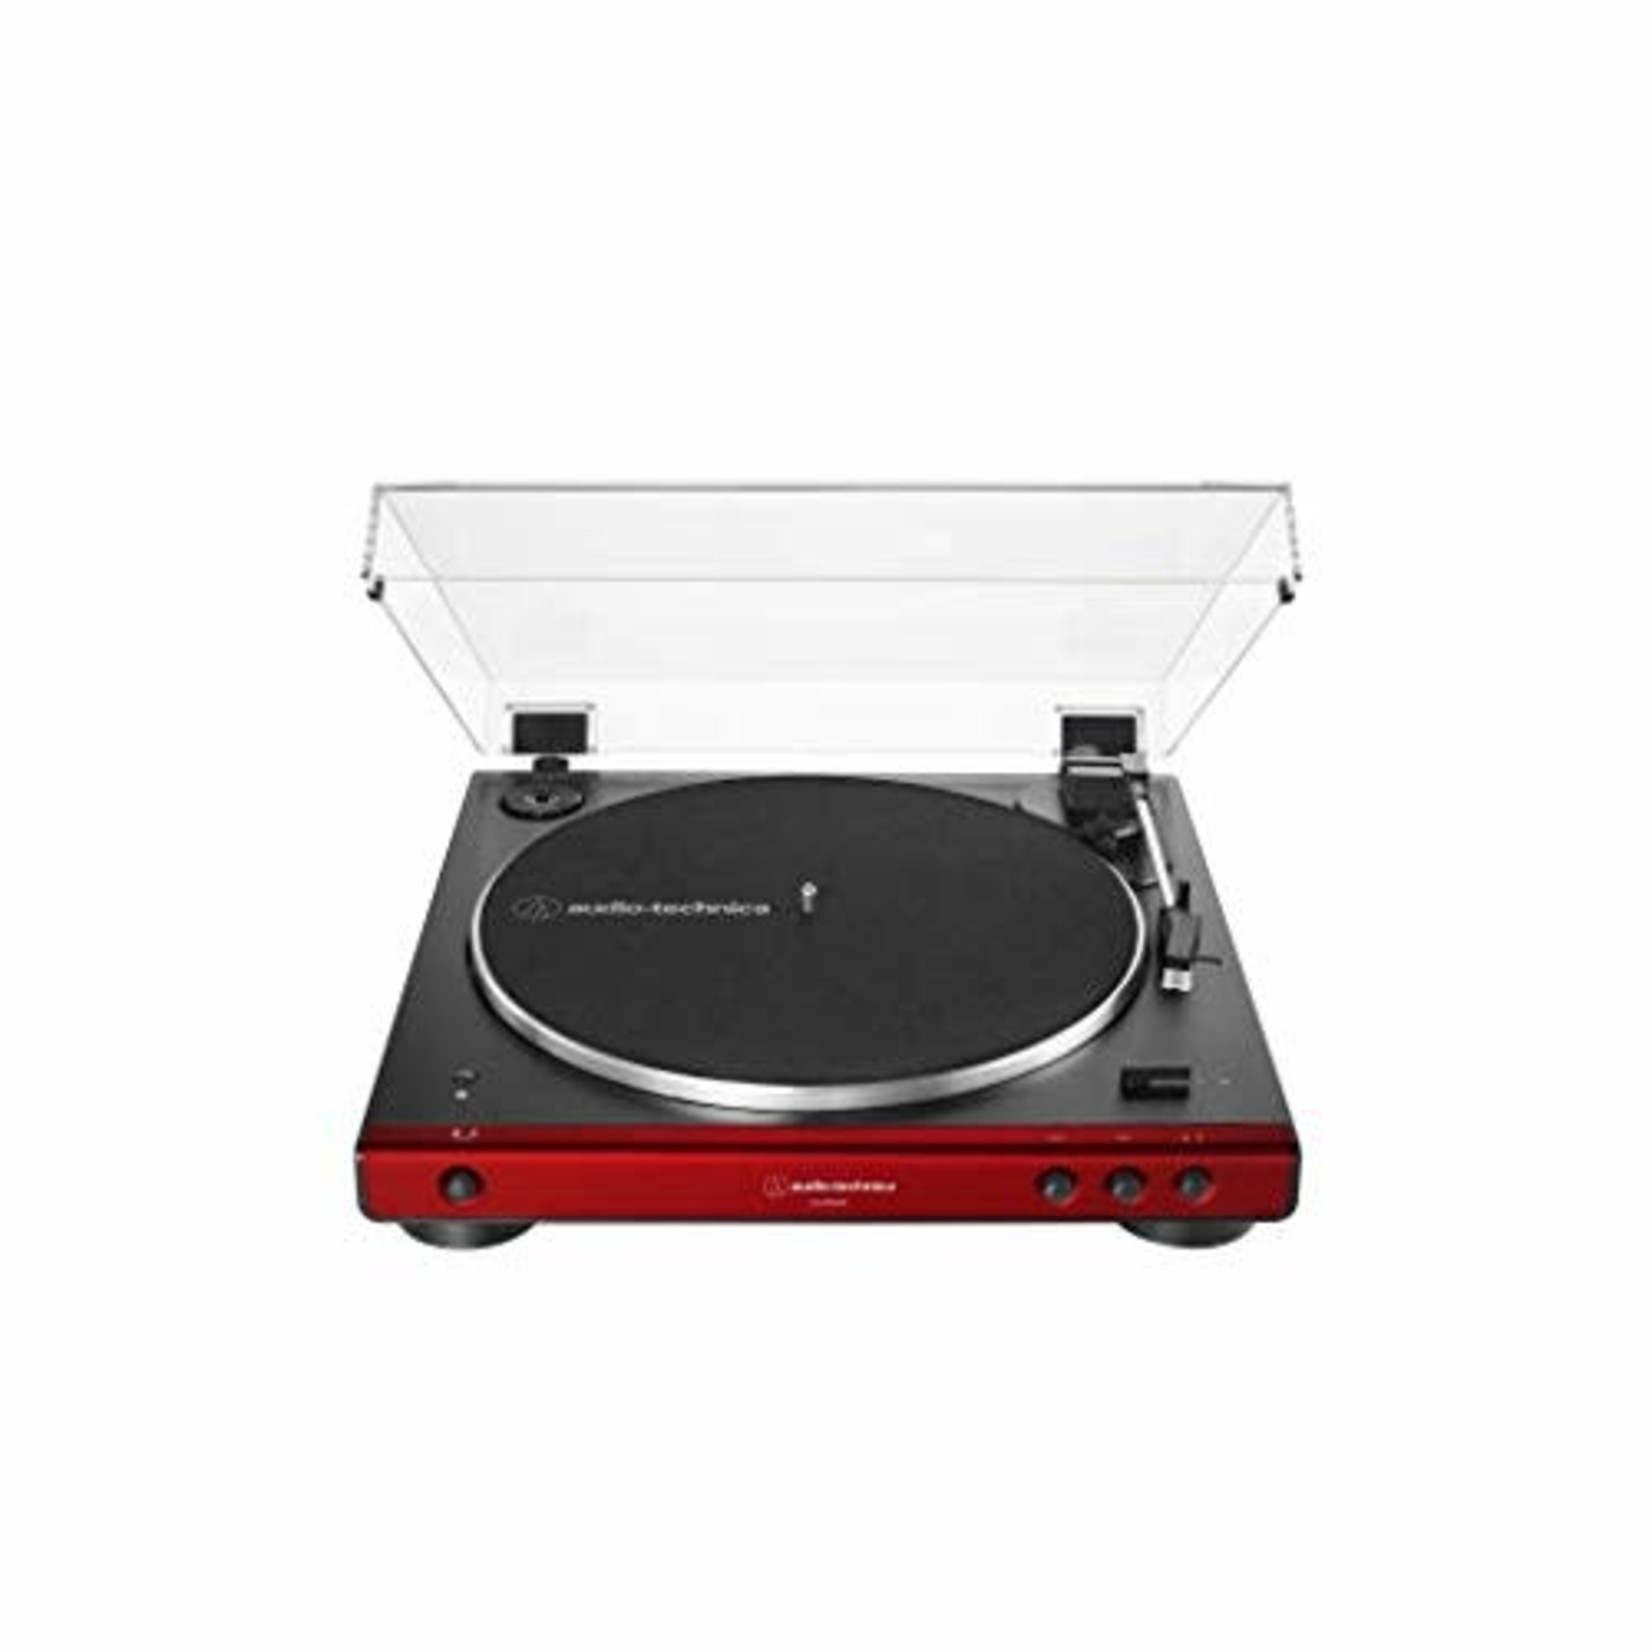 AUDIO-TECHNICA AT-LP60XBT TURNTABLE WITH BLUETOOTH